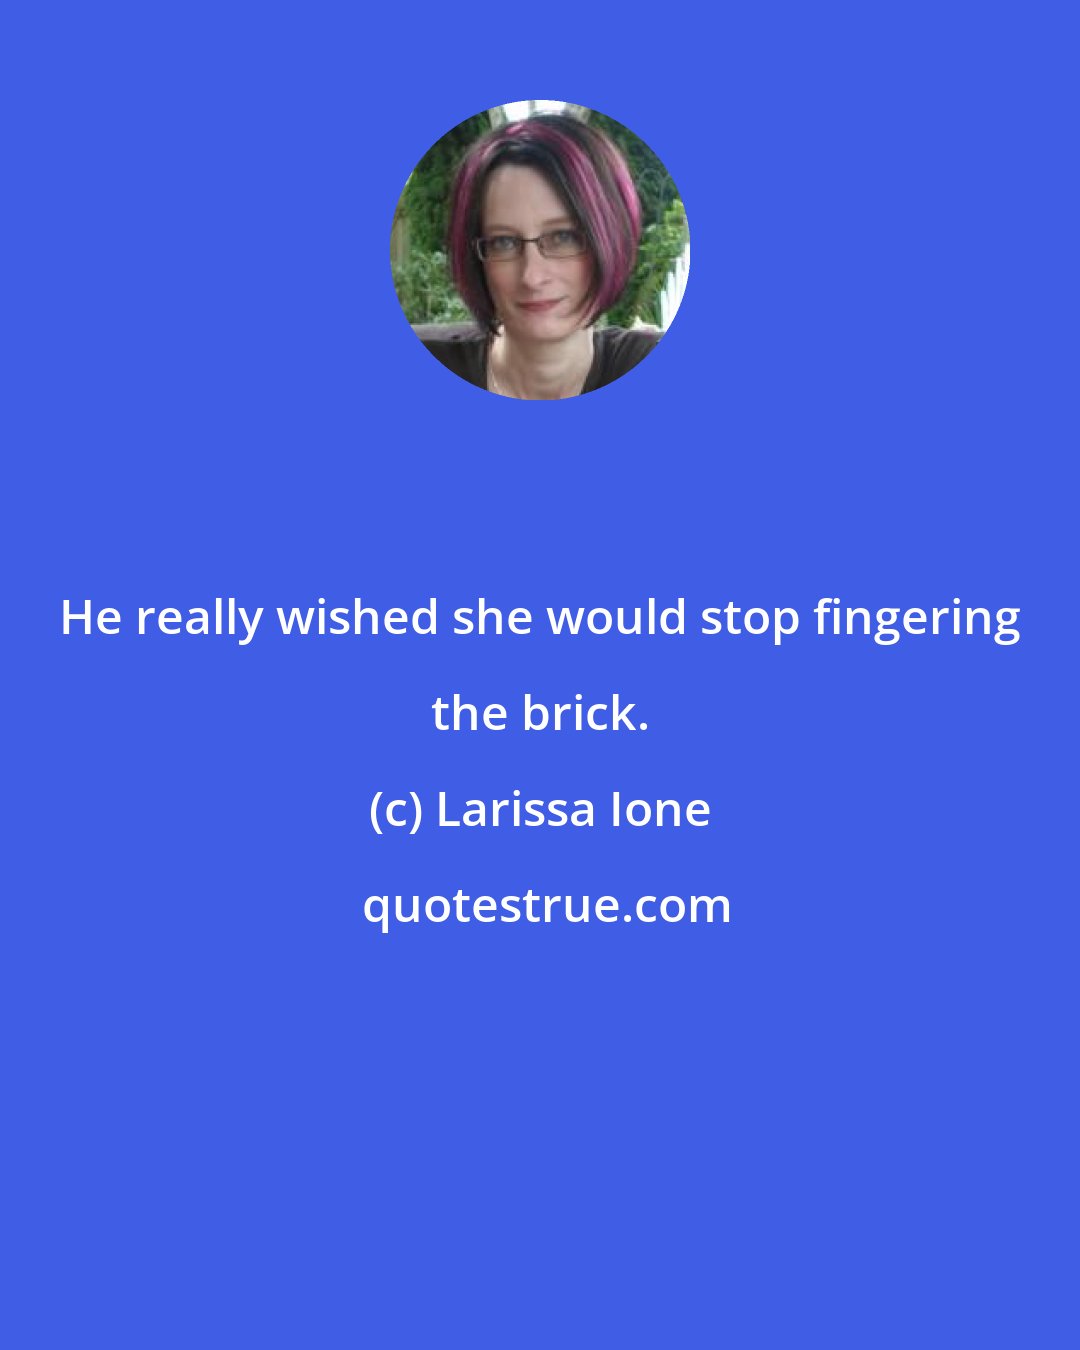 Larissa Ione: He really wished she would stop fingering the brick.